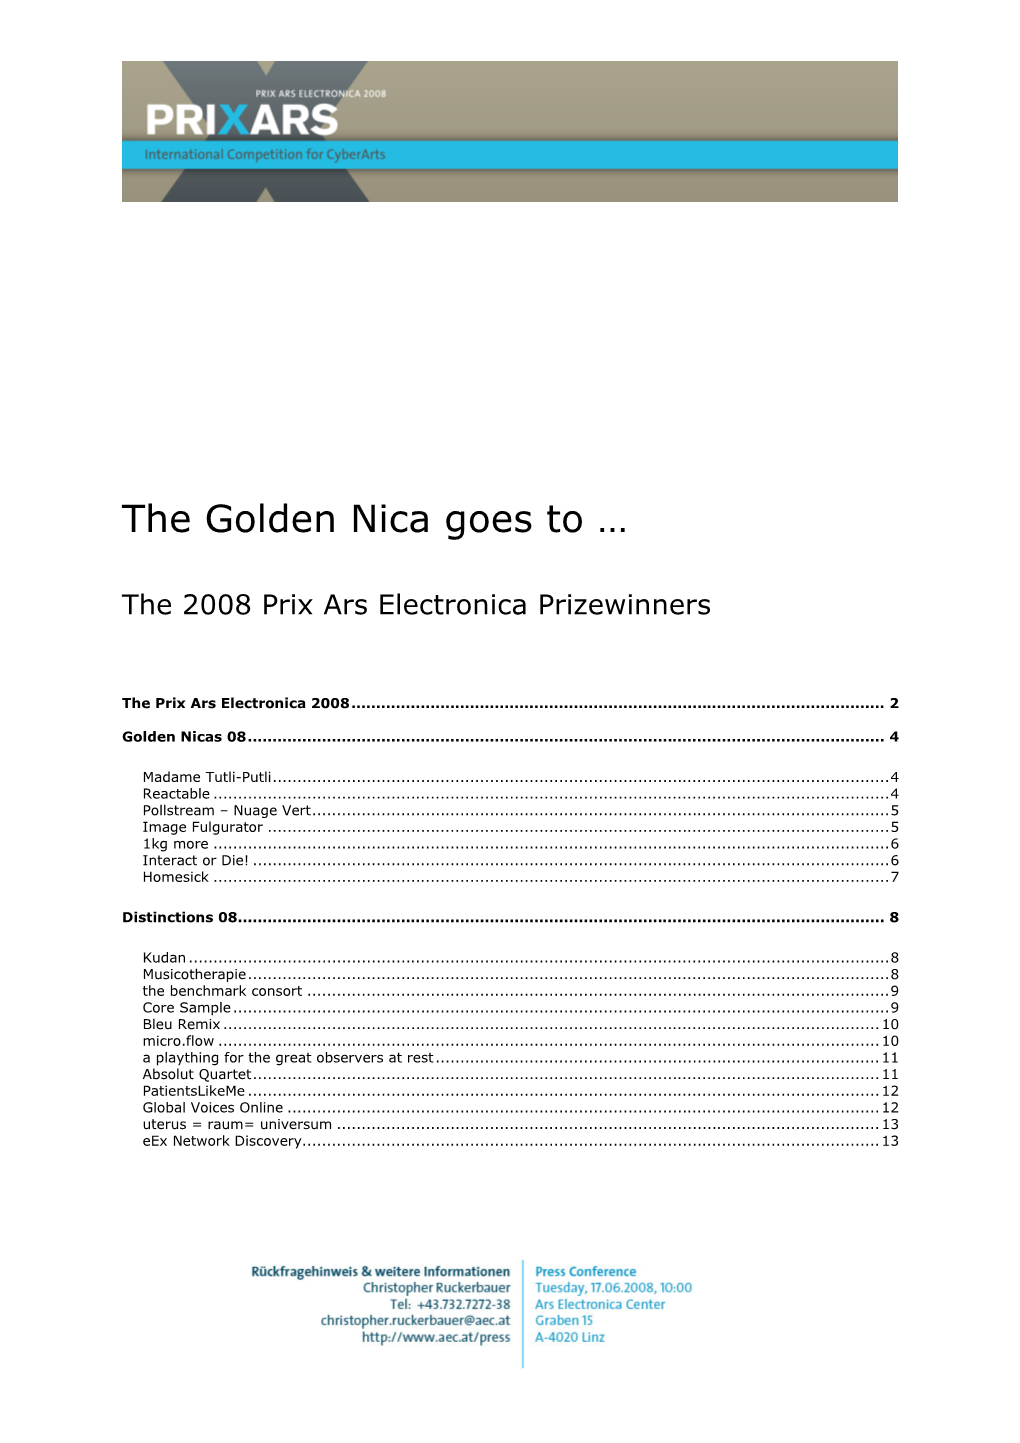 The Golden Nica Goes to …